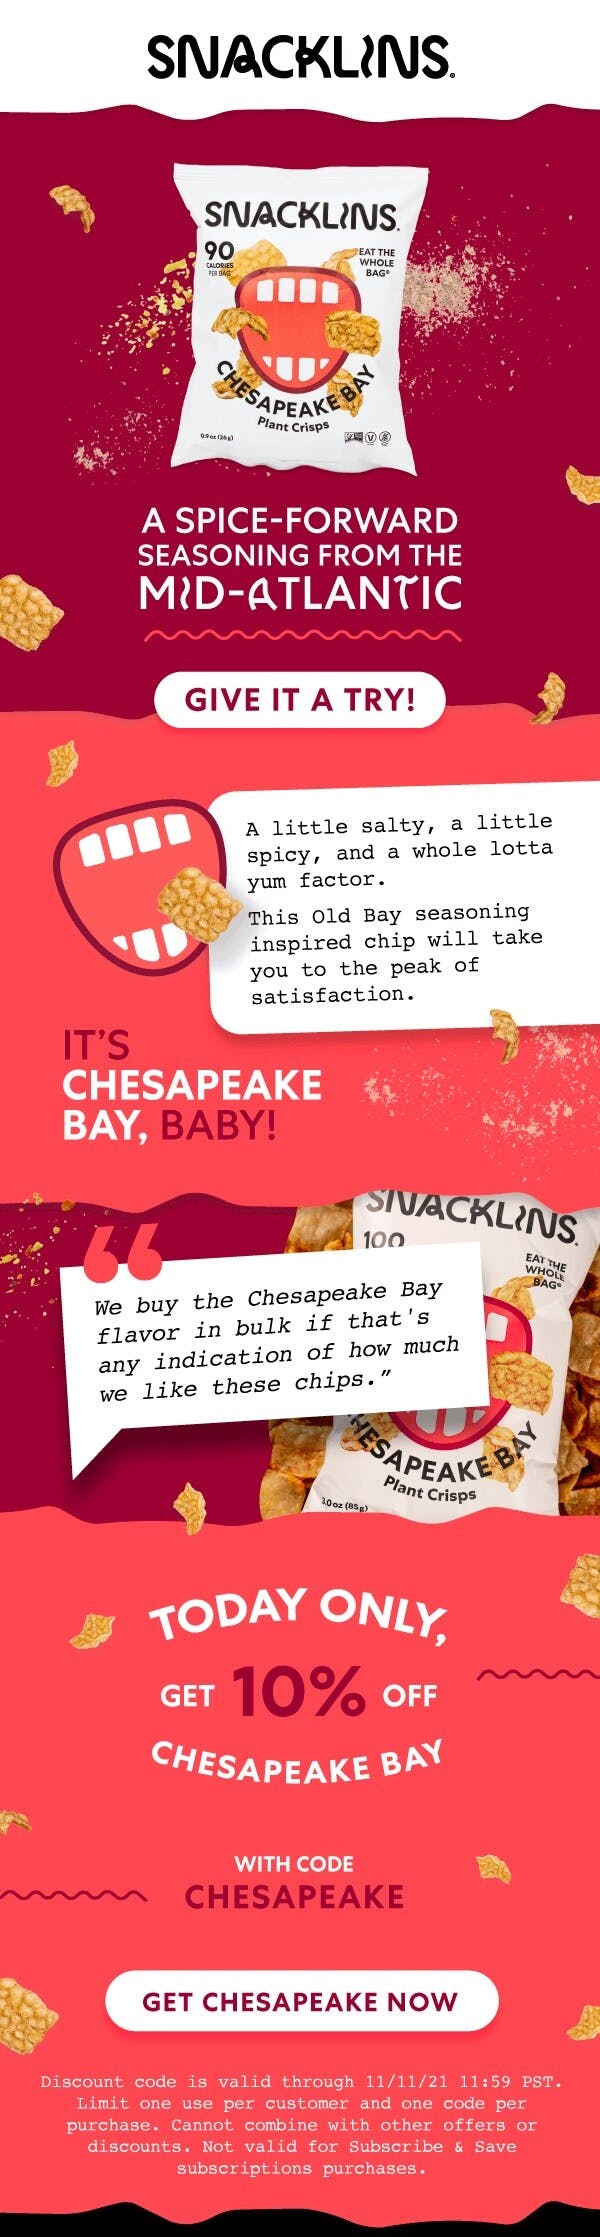 Graphic design and copywriting content kit we made for SNACKLINS email campaign